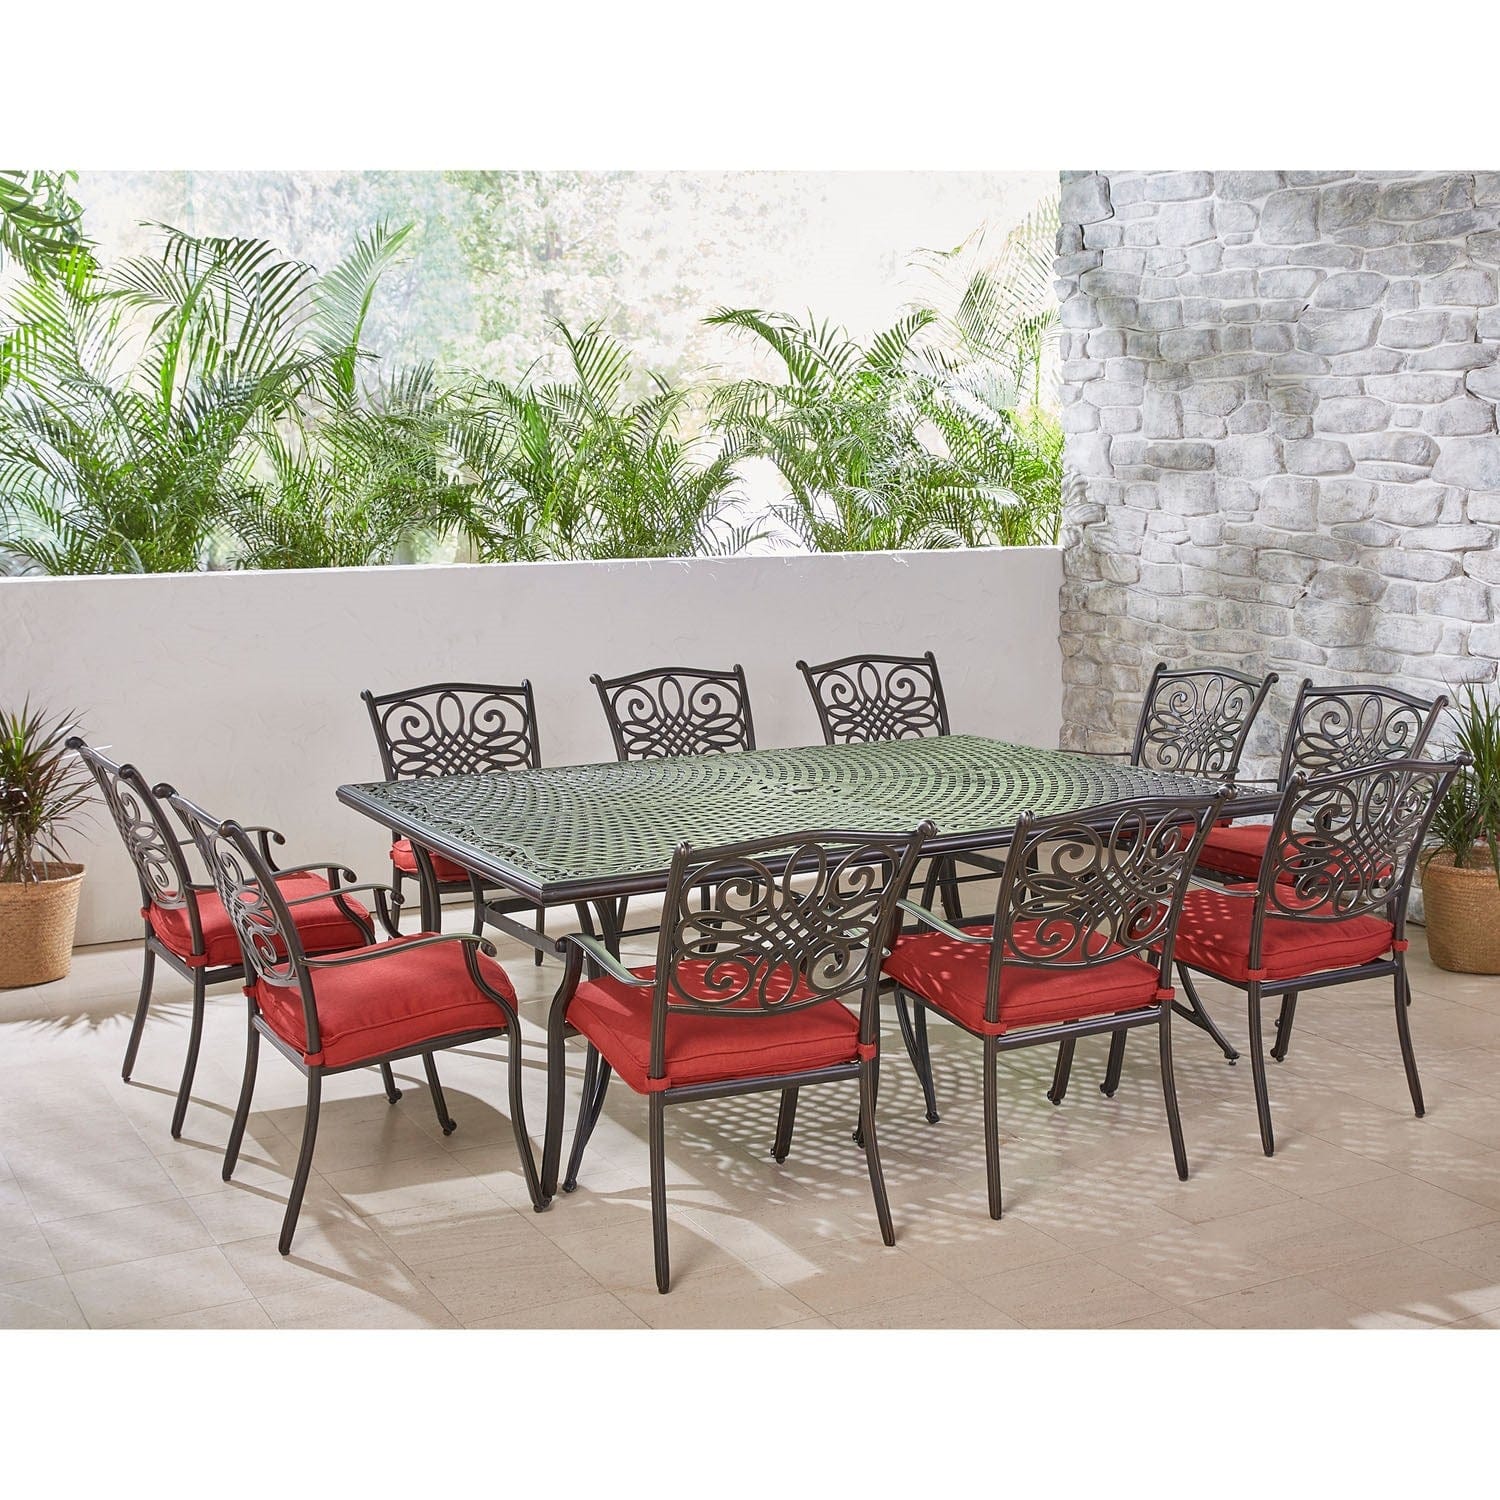 Hanover Outdoor Dining Set Hanover - Traditions 11-Piece Dining Set in Red with Ten Stationary Dining Chairs and an Extra-Long Dining Table - TRADDN11PC-RED